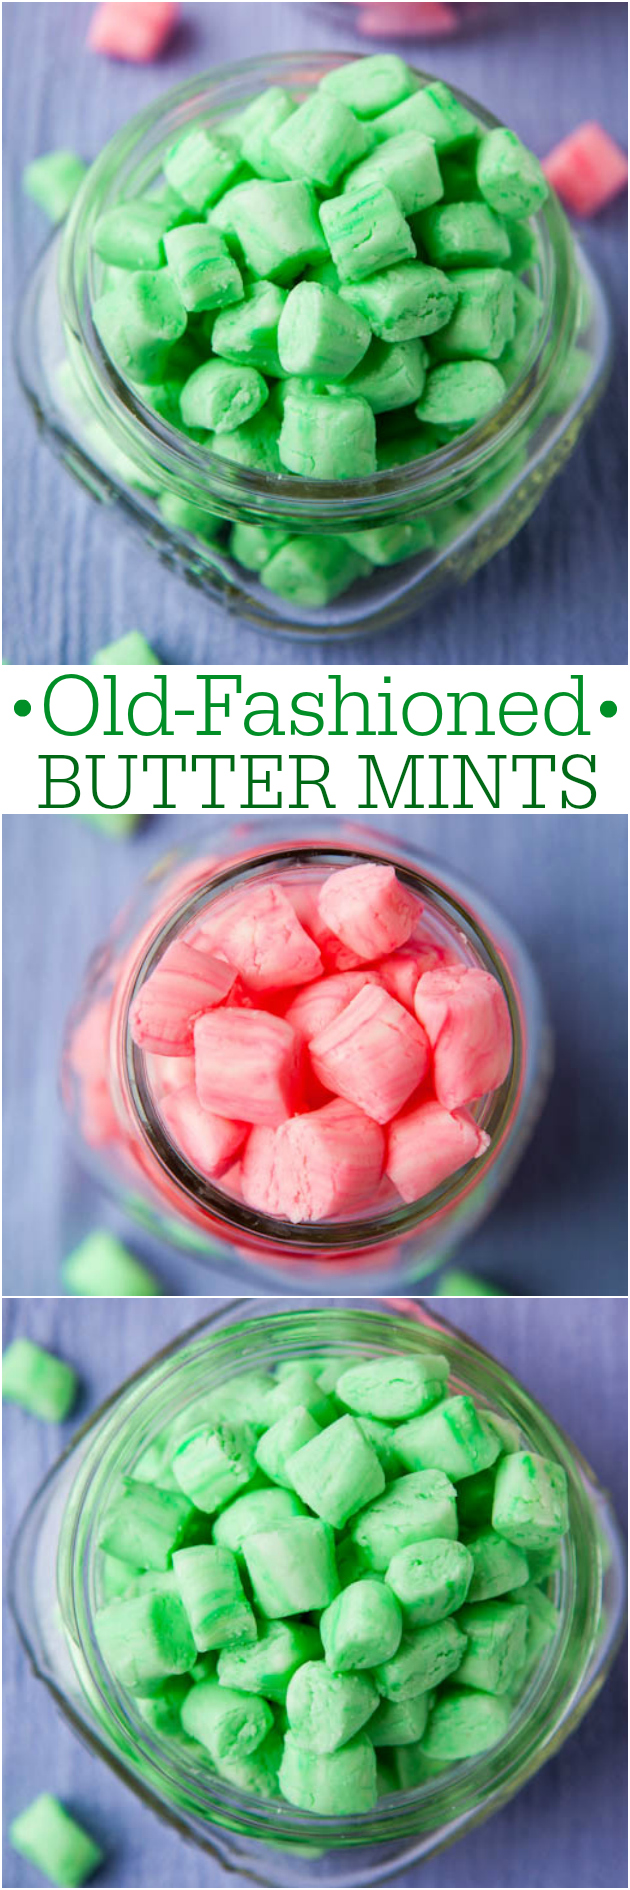 Old-Fashioned Butter Mints - Easy, no-bake recipe for creamy, smooth mints like your grandma kept in her candy jar or that you'd get in a restaurant!